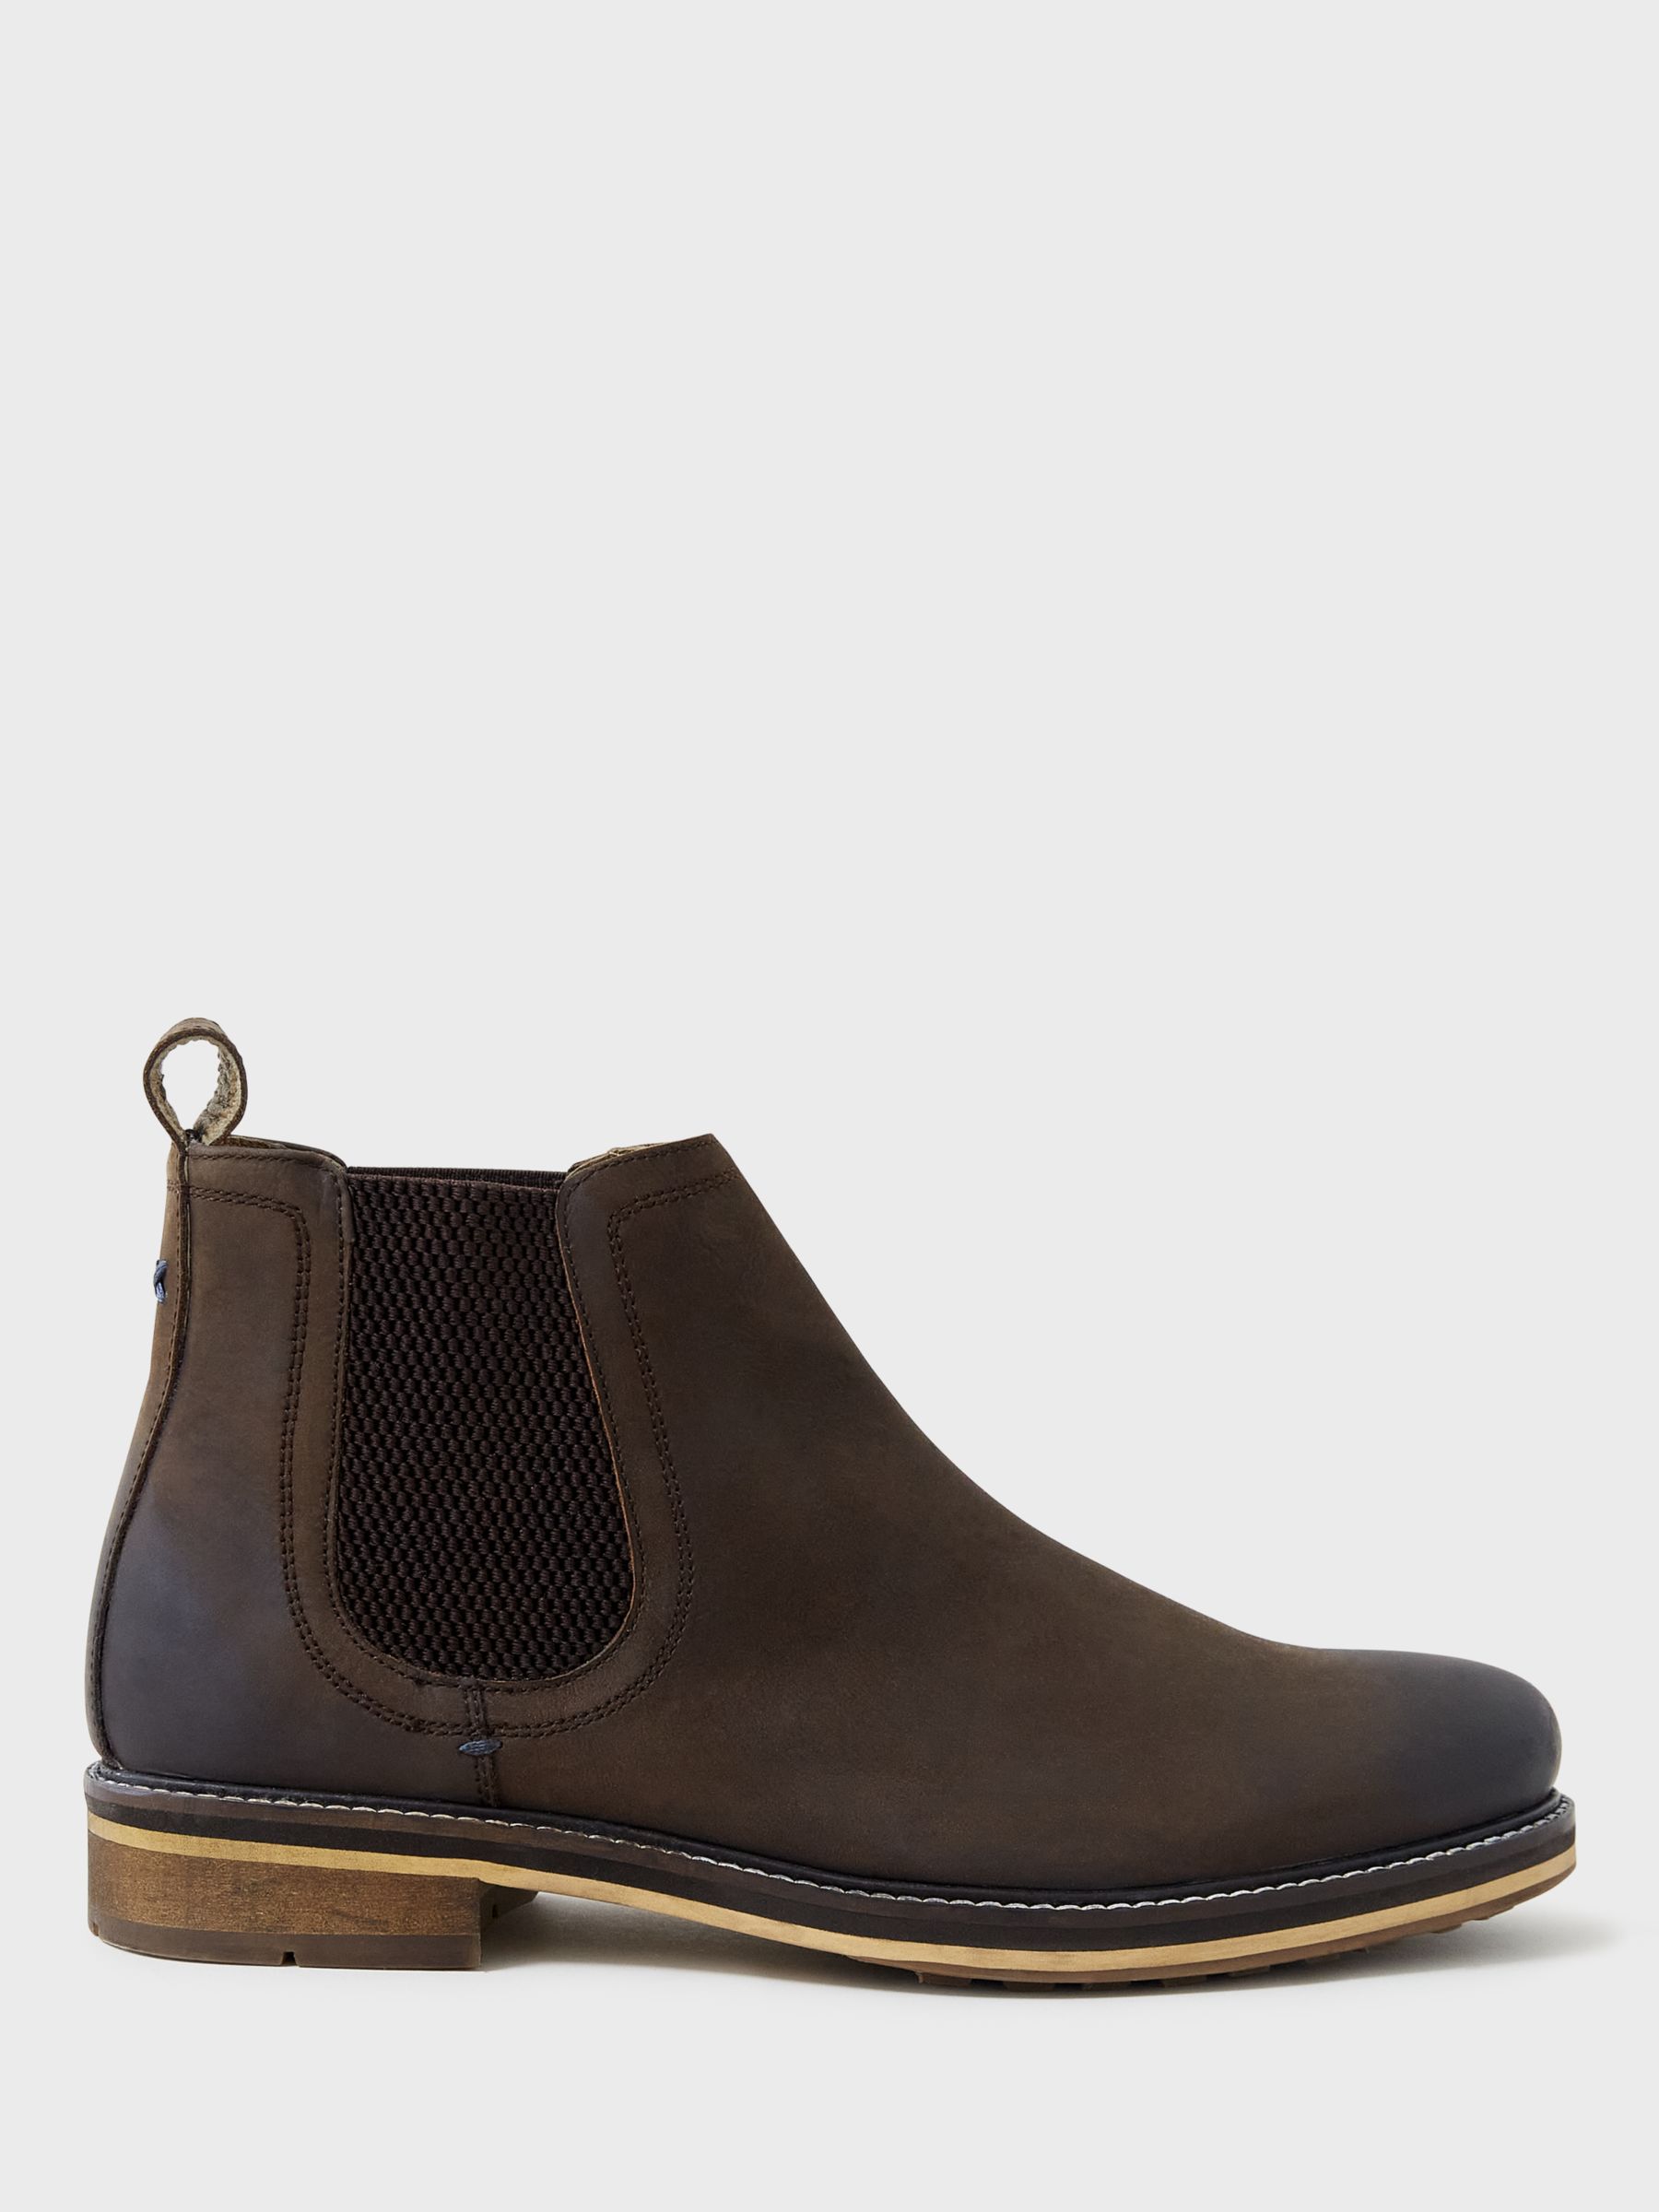 Crew Clothing Parker Leather Chelsea Boots, Dark Brown at John Lewis ...